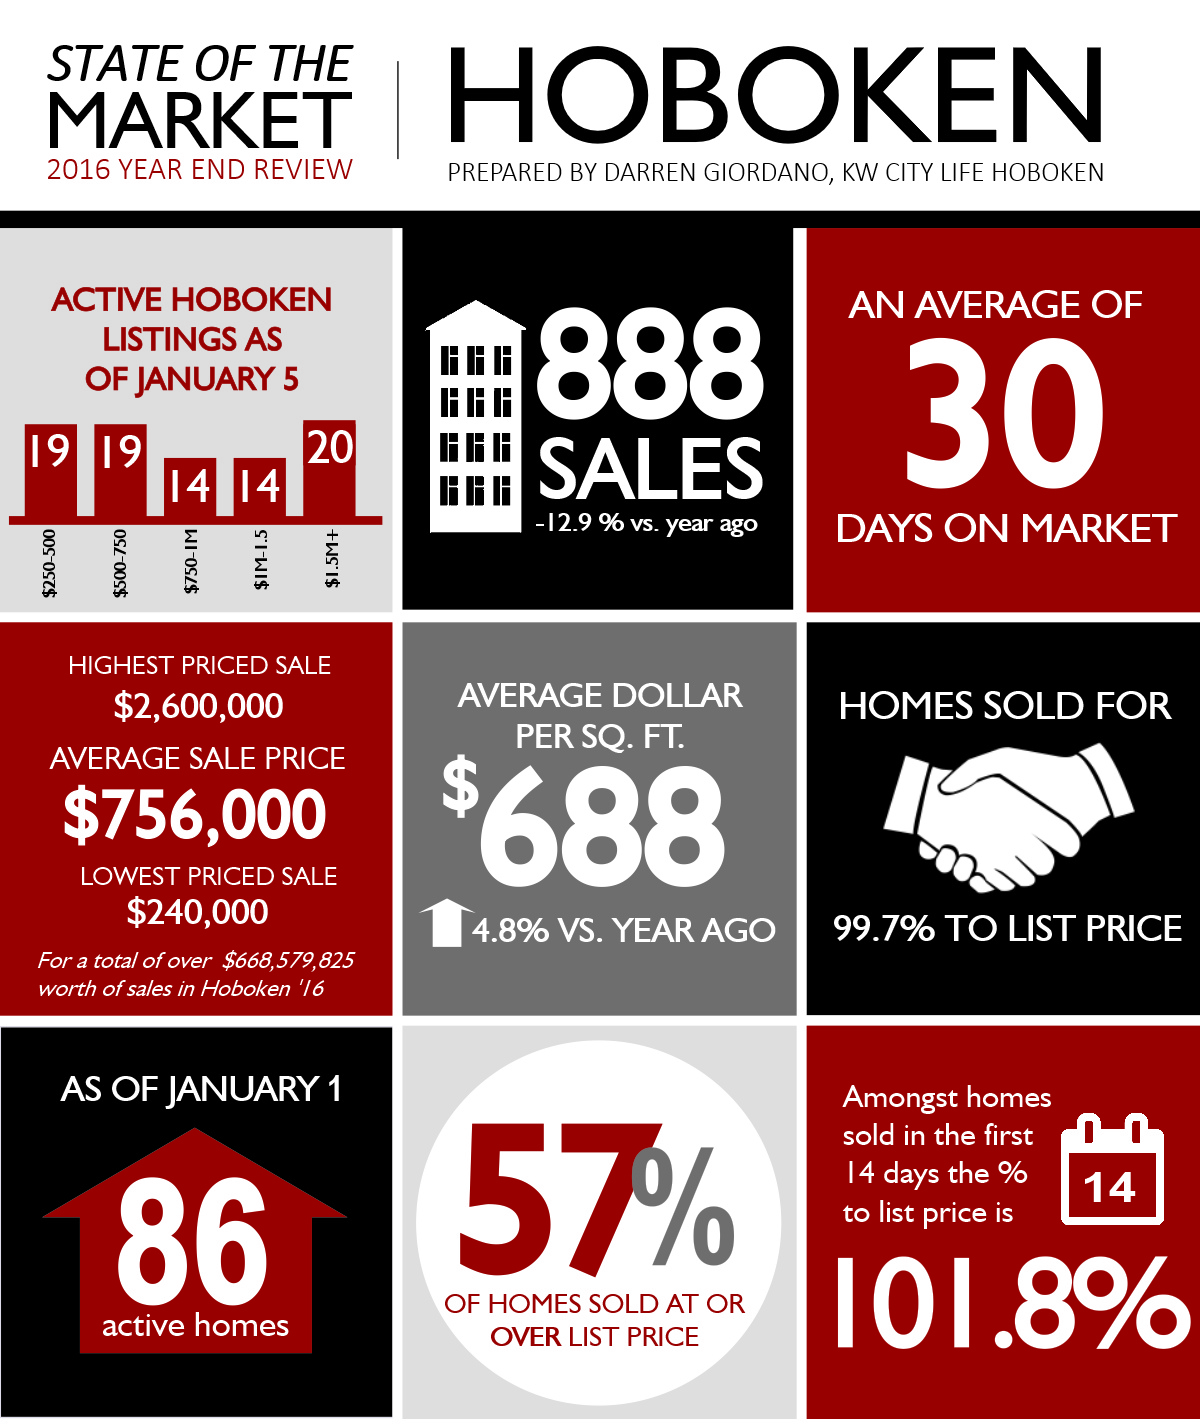 State of the Market - Hoboken 2016 Year in Review